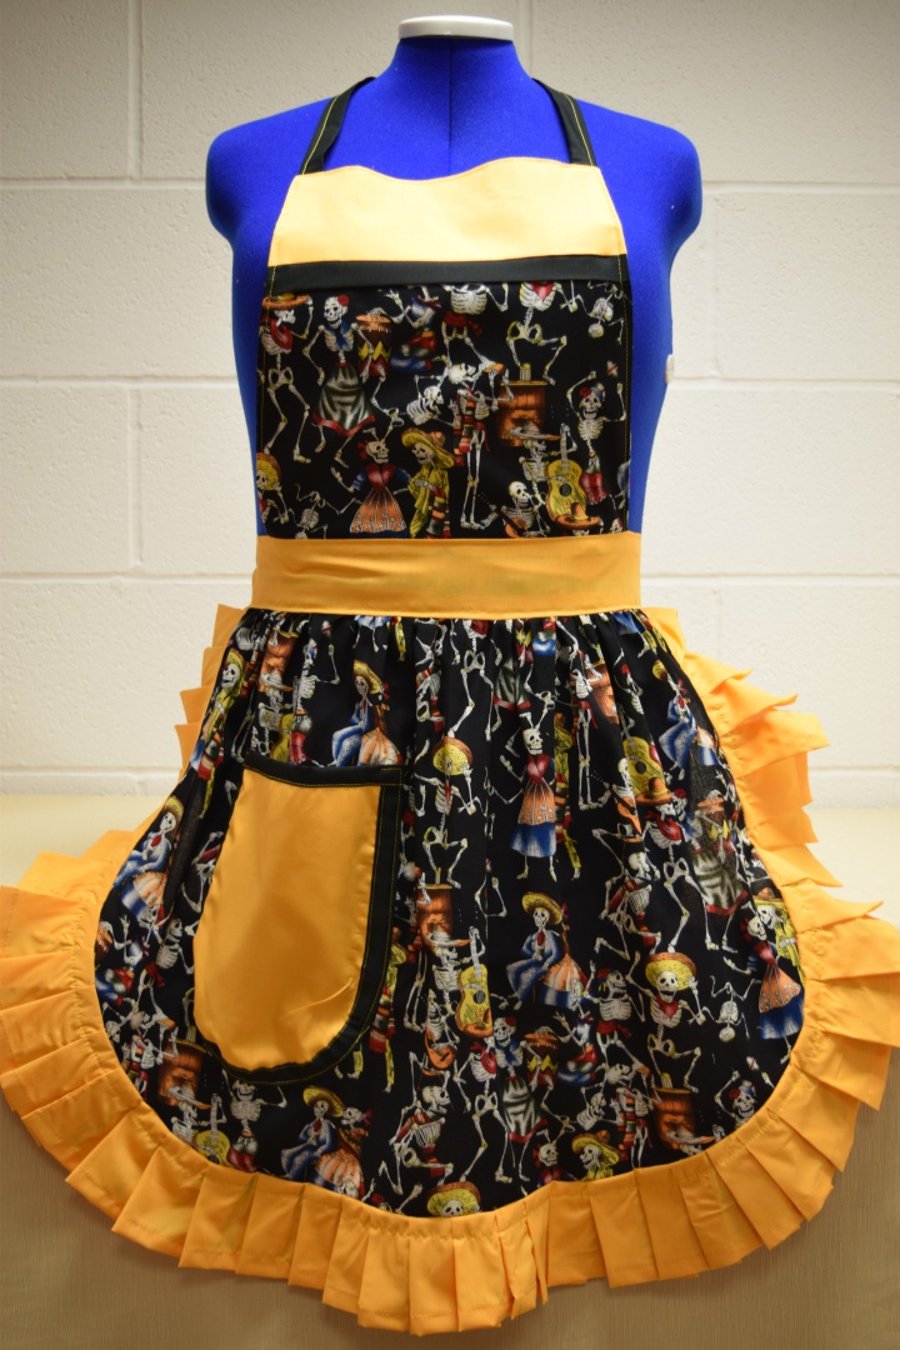 Vintage 50s Style Full Apron Pinny - Black "Day of the Dead" with Orange Trim